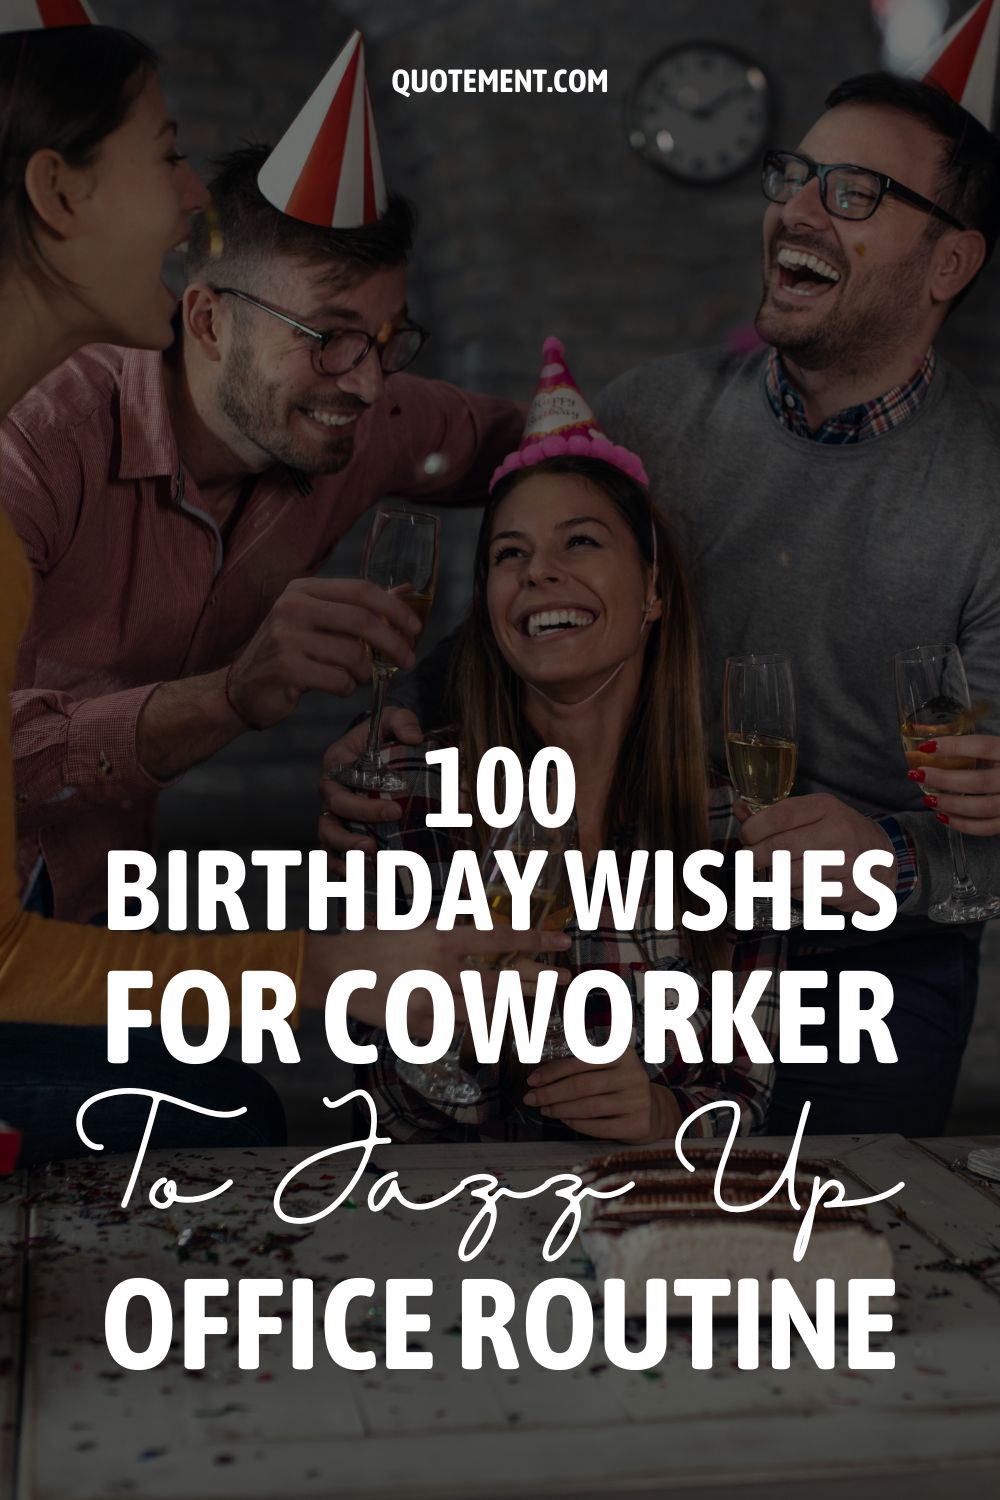 100 Birthday Wishes For Coworker To Jazz Up Office Routine 